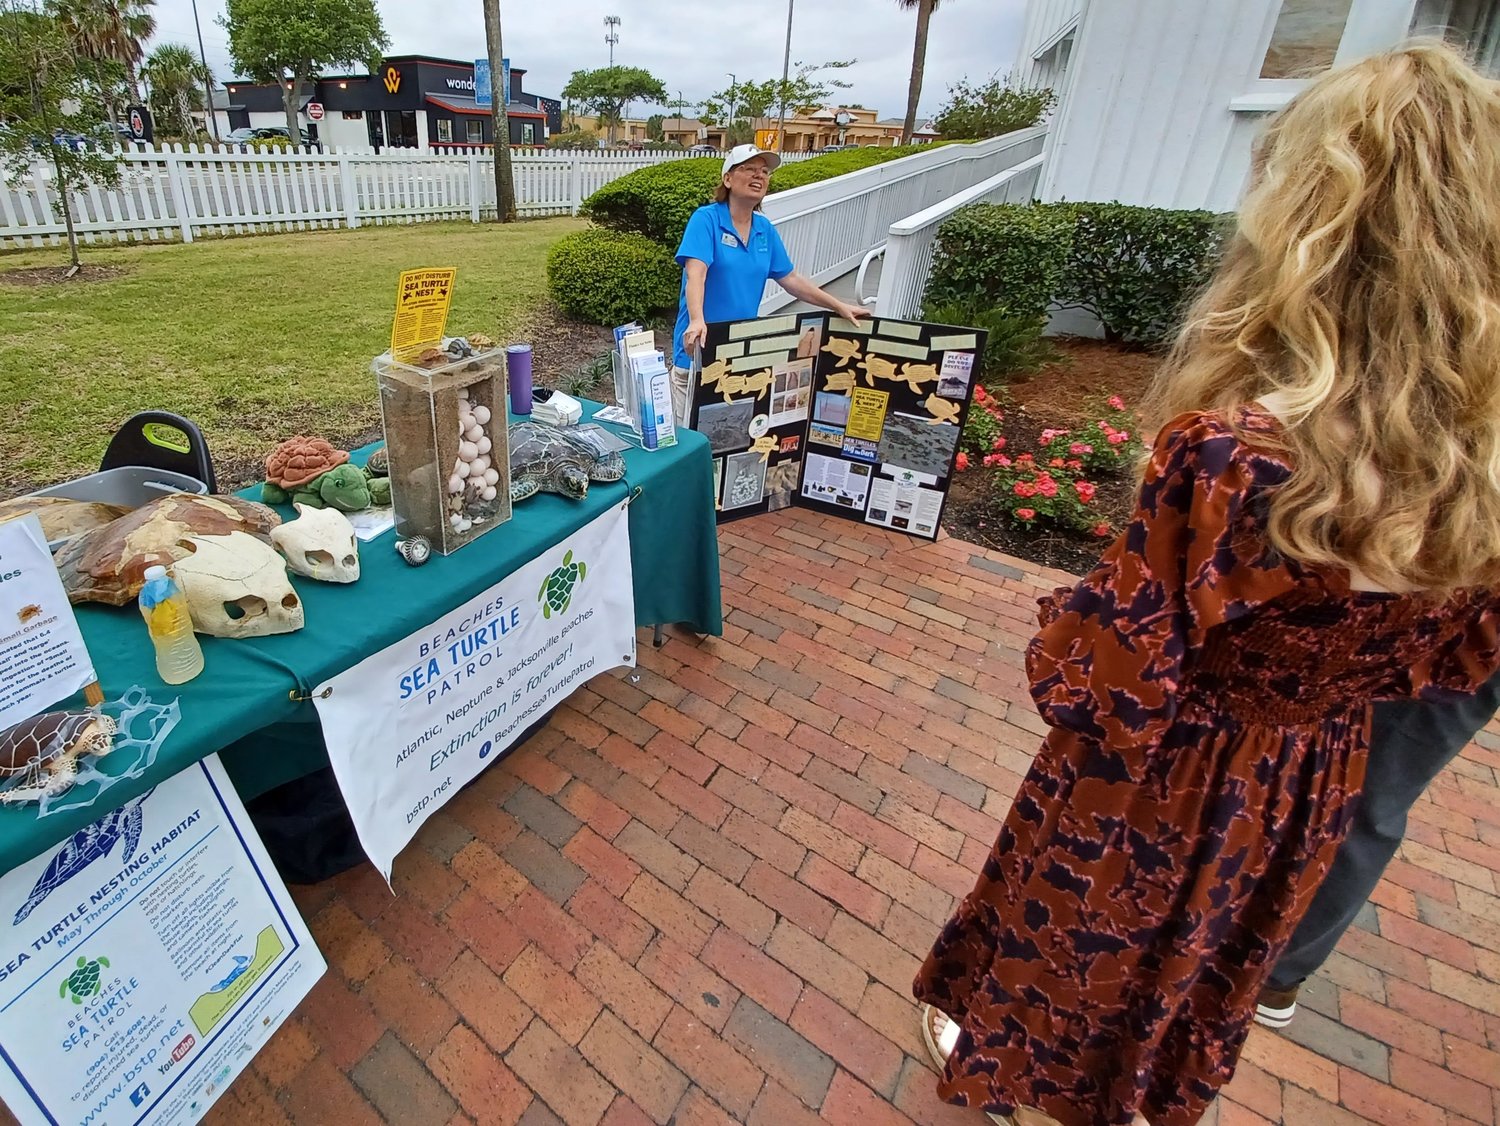 A representative of the Beaches Sea Turtle Patrol speaks to visitors during the Beaches Museum’s “Springing the Blooms” event.